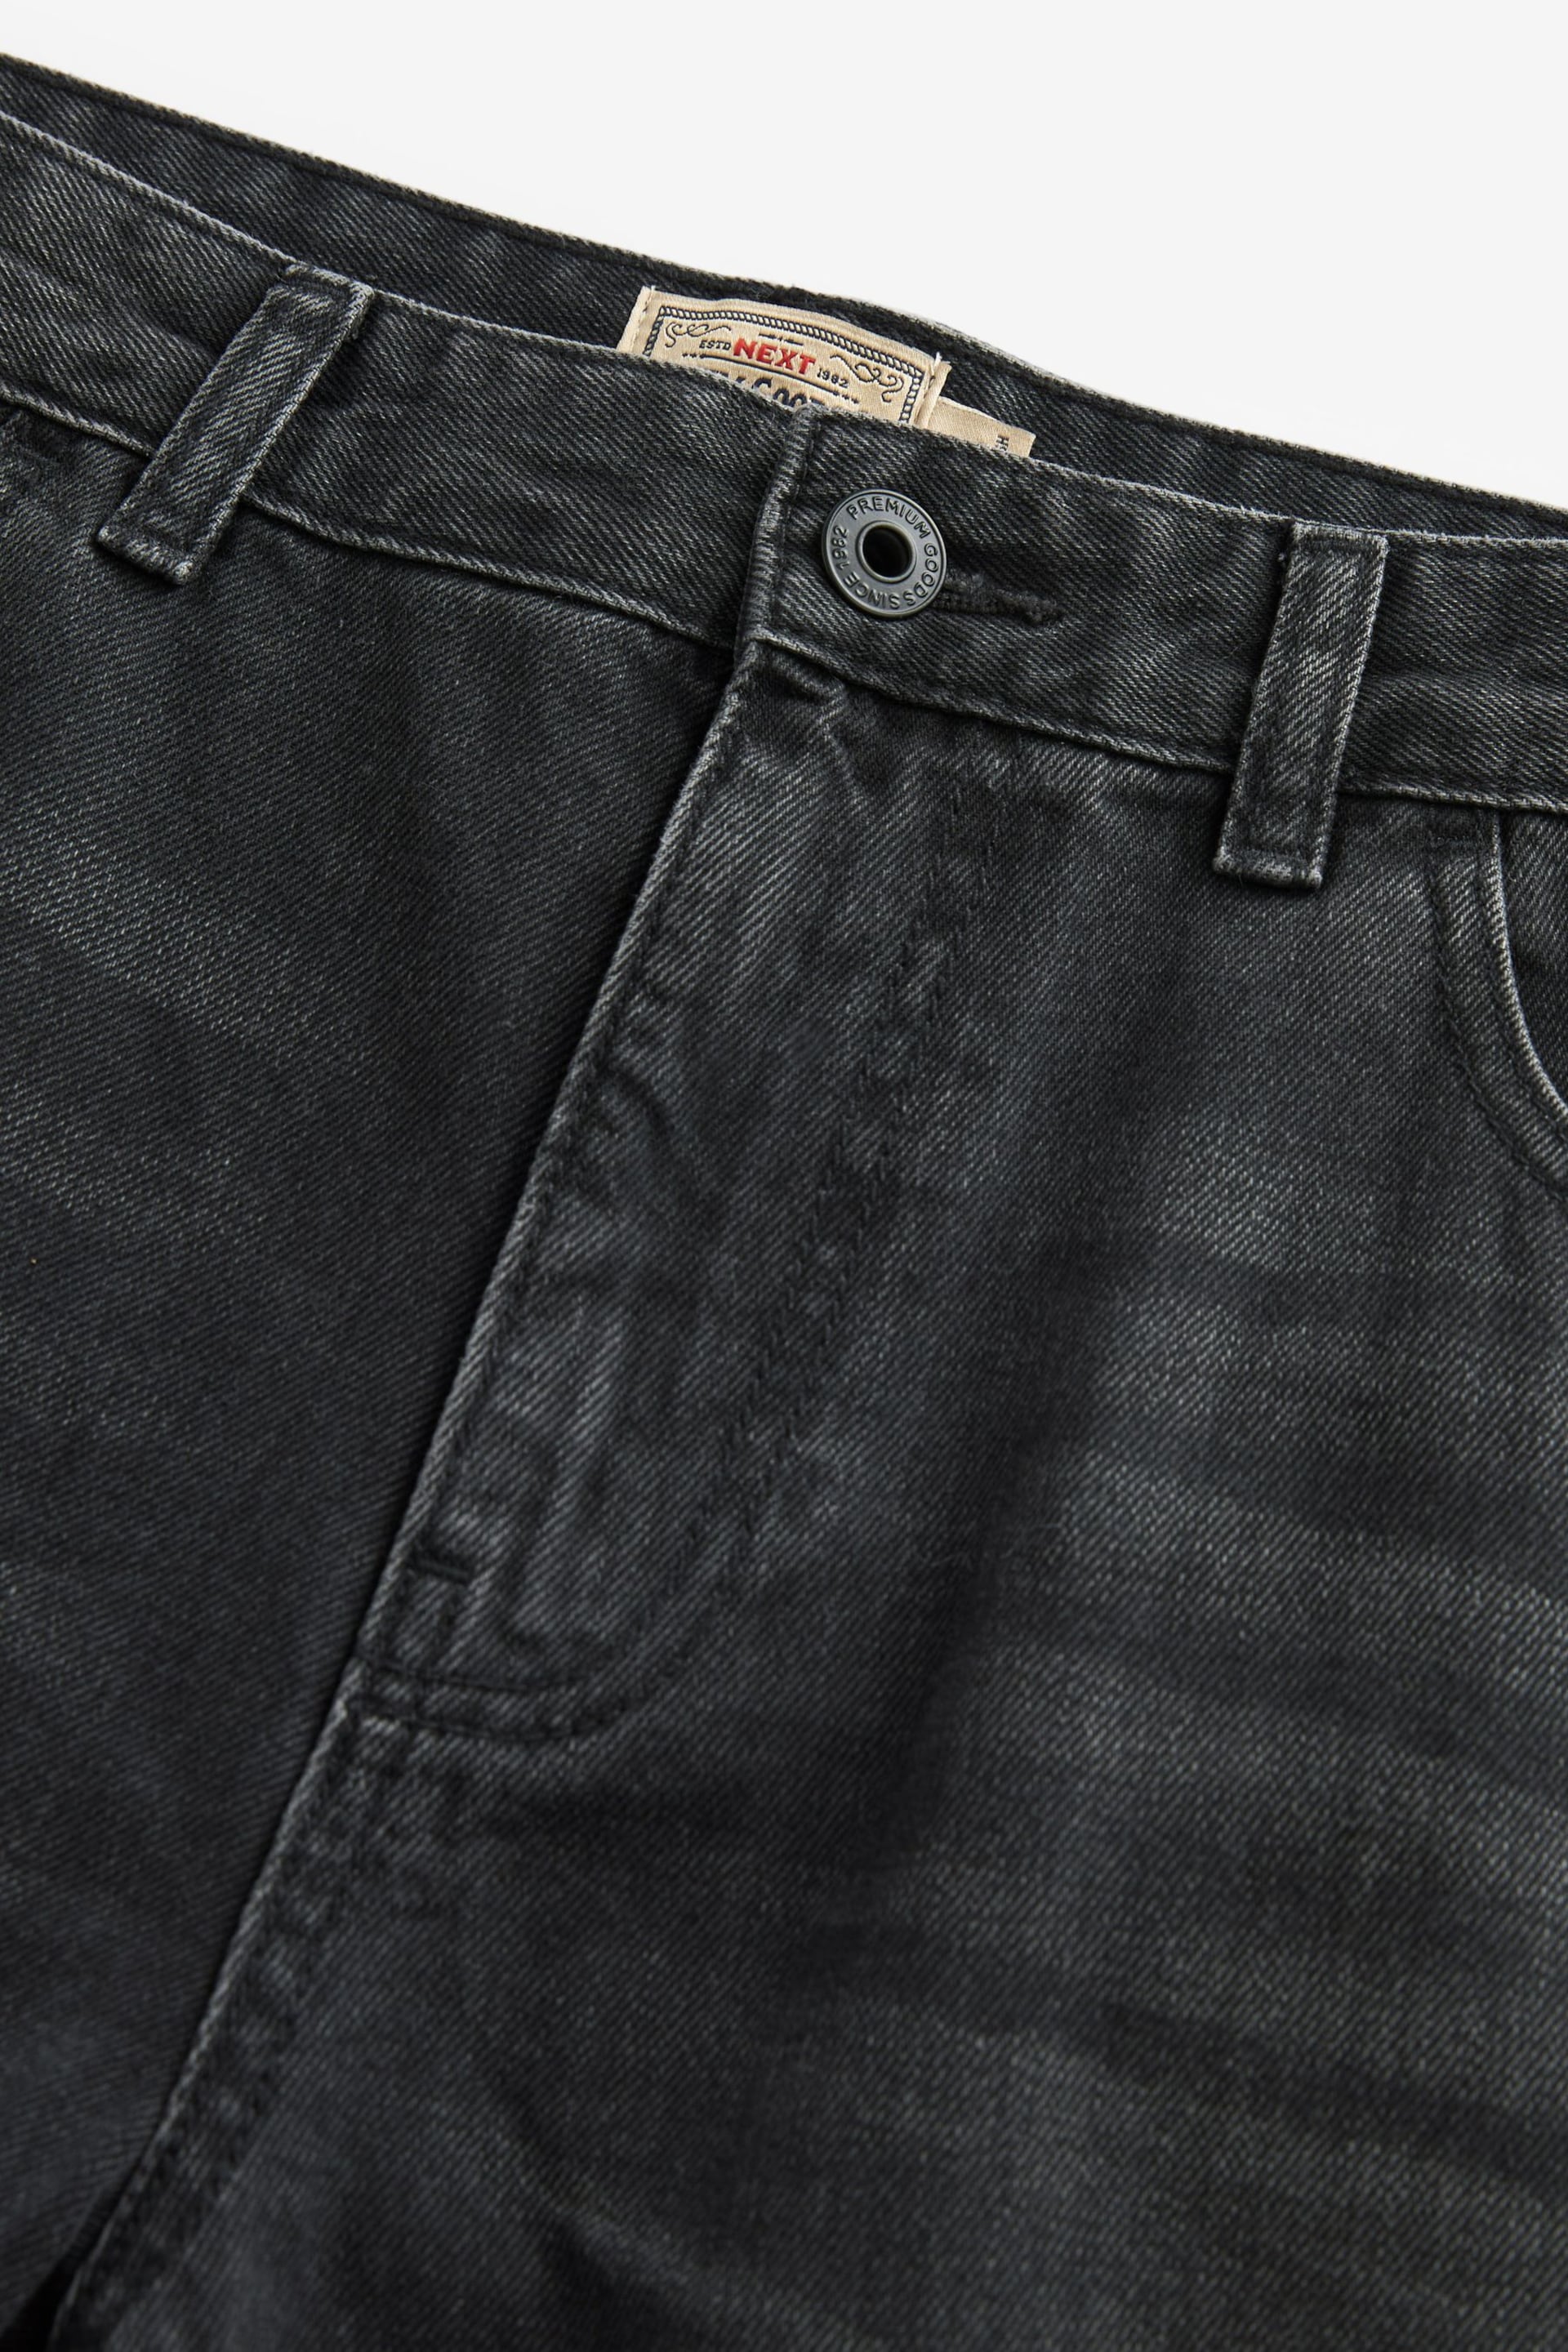 Black Washed Slim Fit 100% Cotton Authentic Jeans - Image 8 of 11